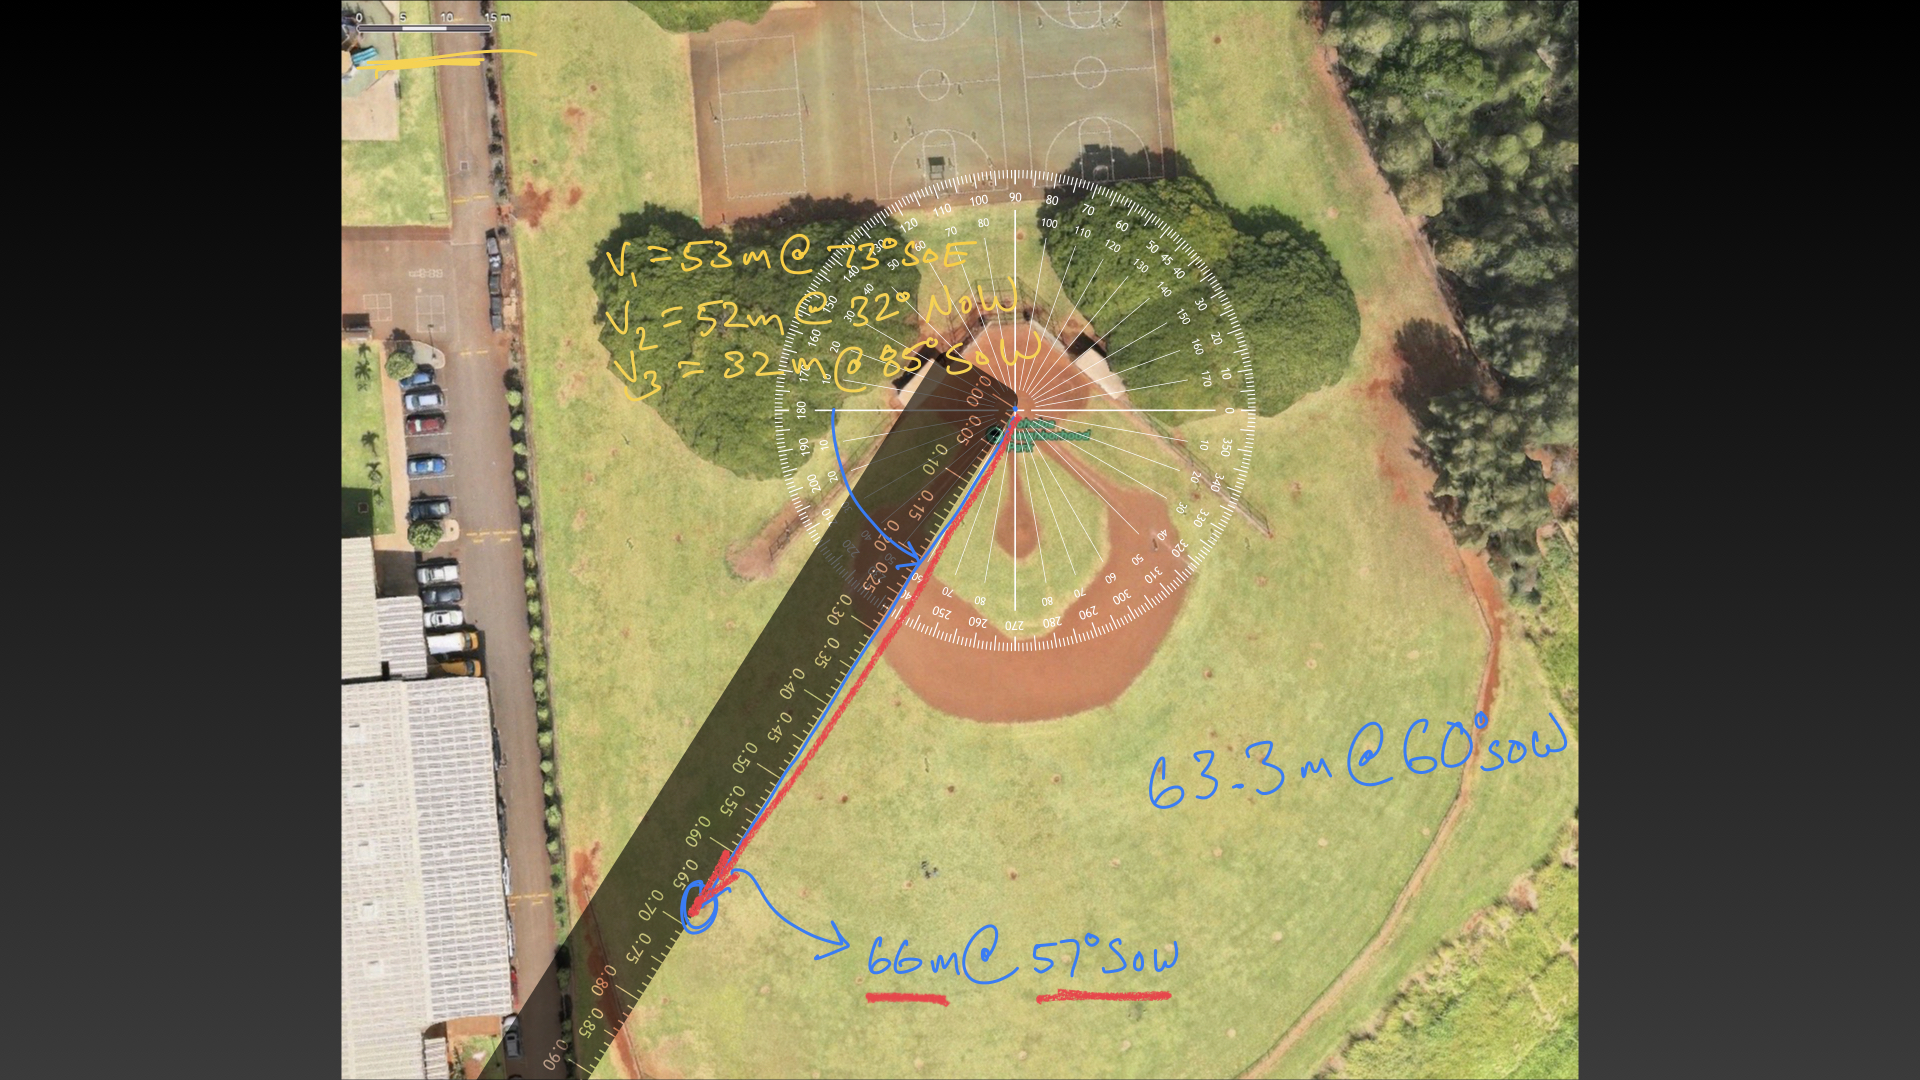 Screenshot of Apple Maps with ruler and protractor Keynote shapes overlaid